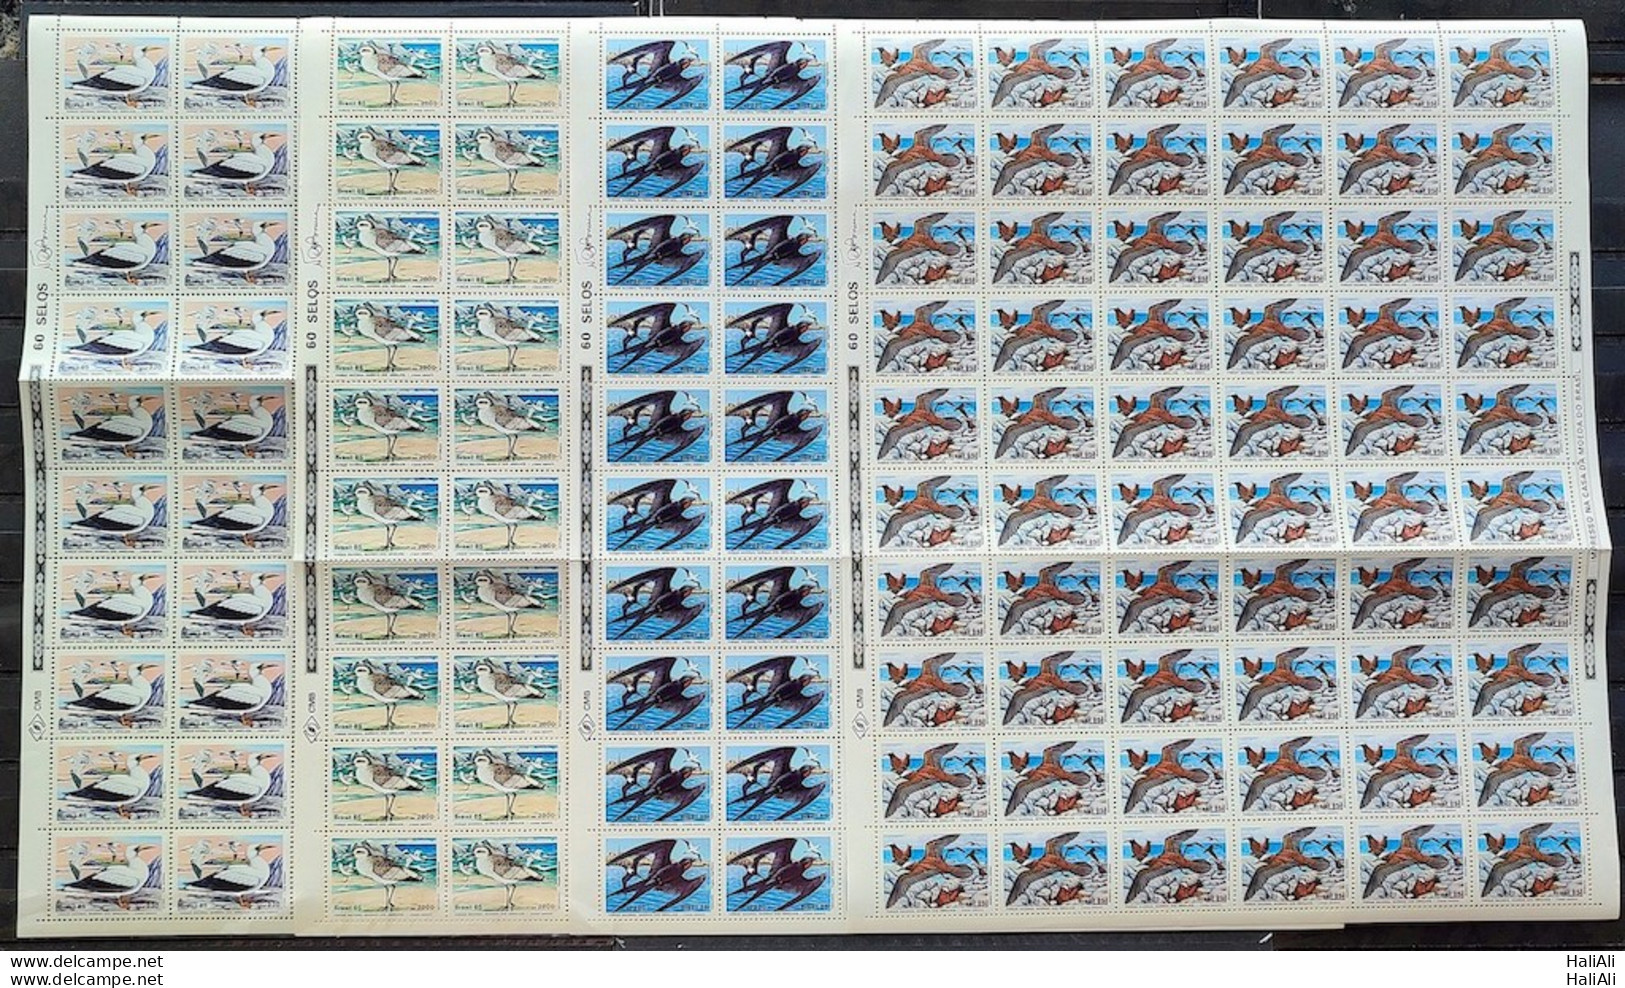 C 1461 Brazil Stamp Fauna Abrolhos Ave Bird 1985 Sheet Complete Series - Unused Stamps